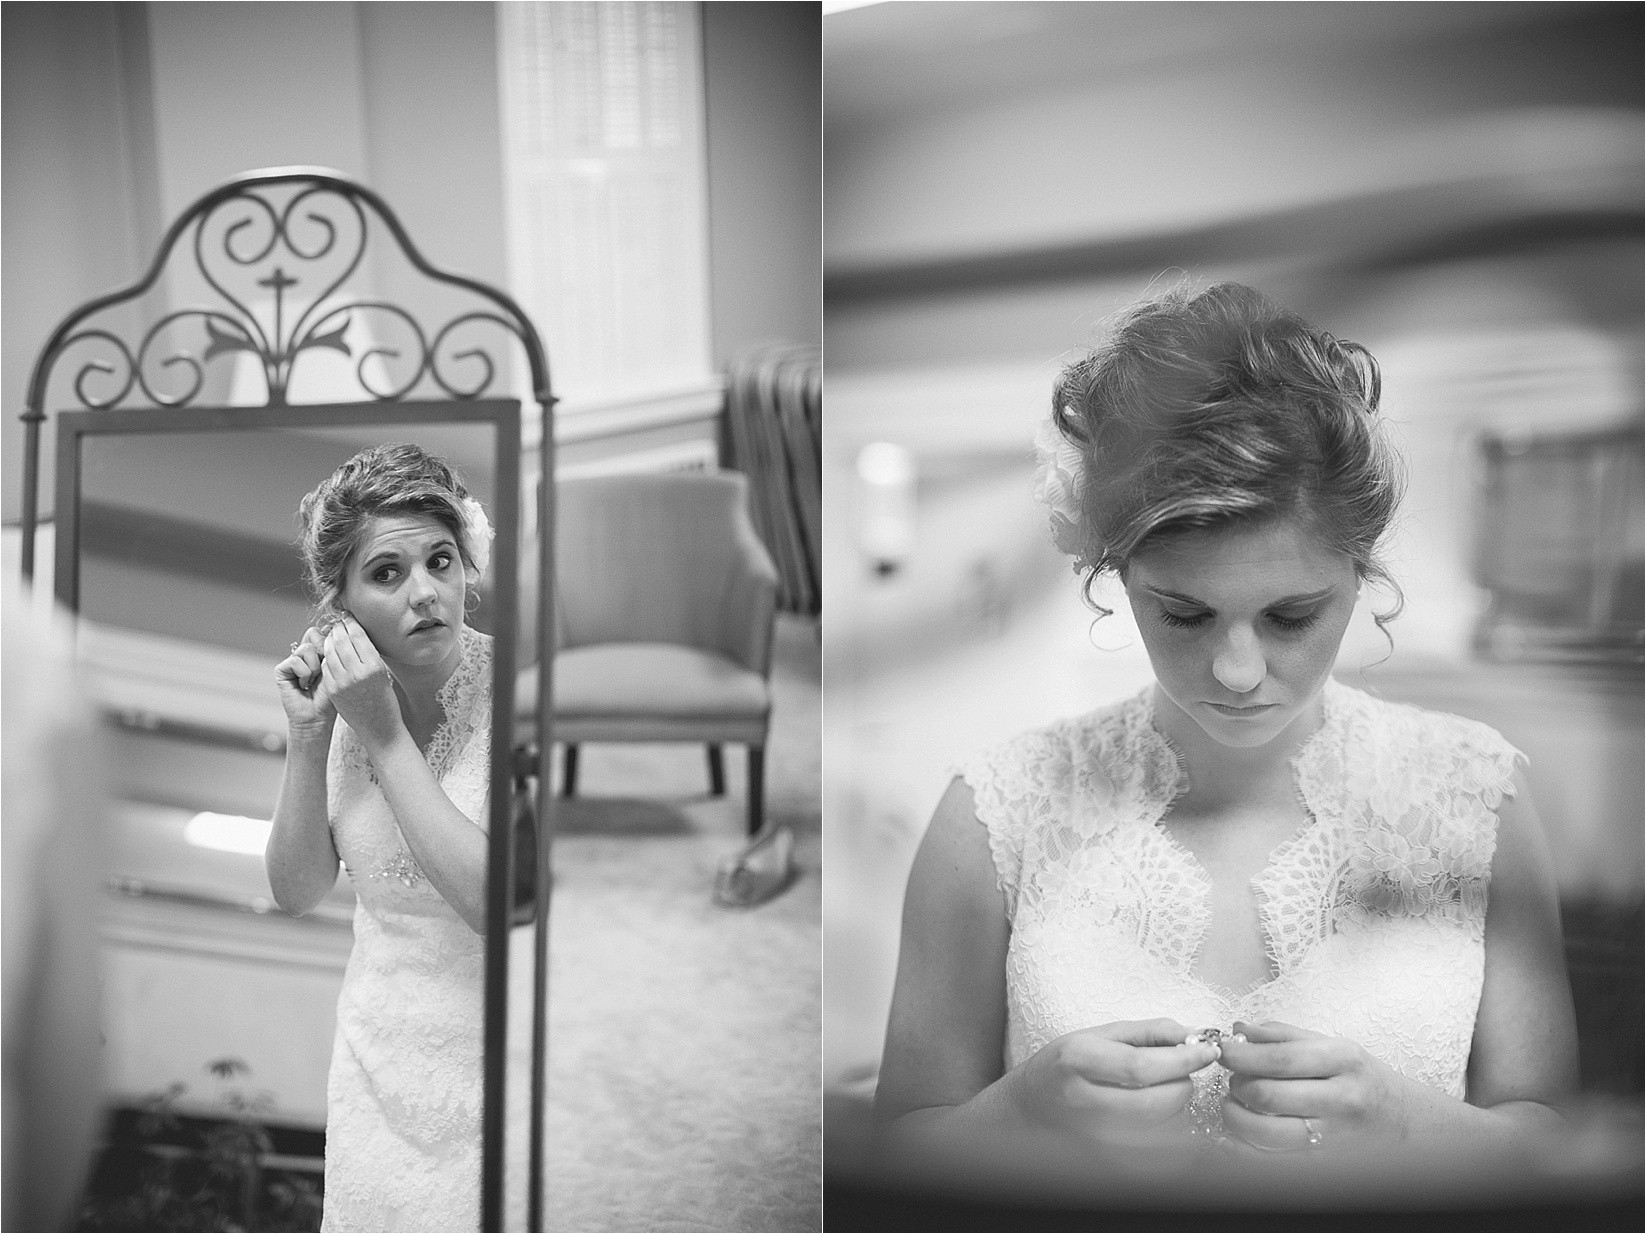 The mirror at the davidson college chapel wedding in Davidson north Carolina and the Charles mack citizen center wedding and reception